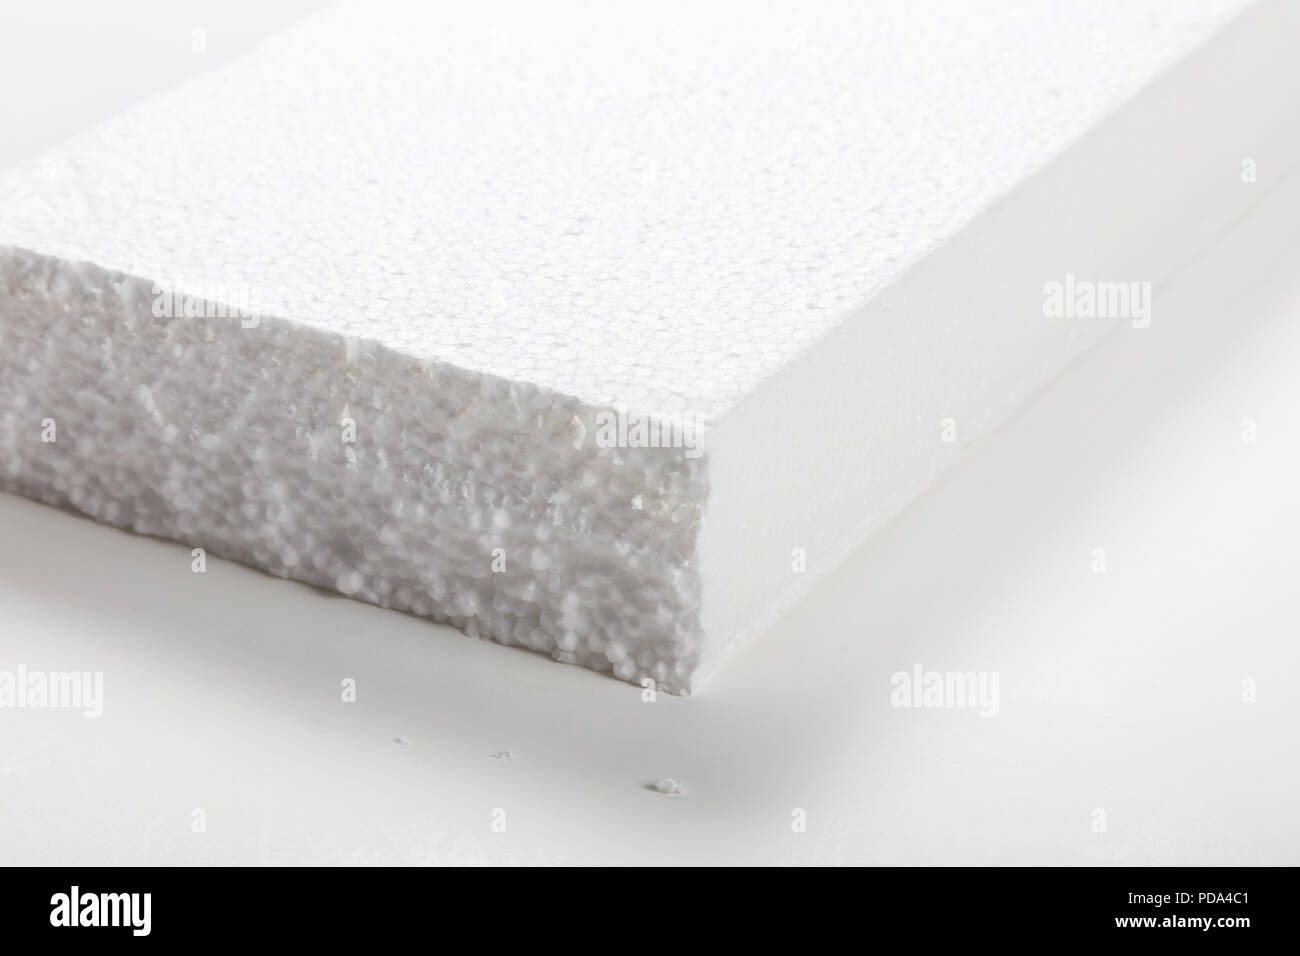 White Foam Board Close Up, Packaging Material. Stock Photo, Picture and  Royalty Free Image. Image 111370643.